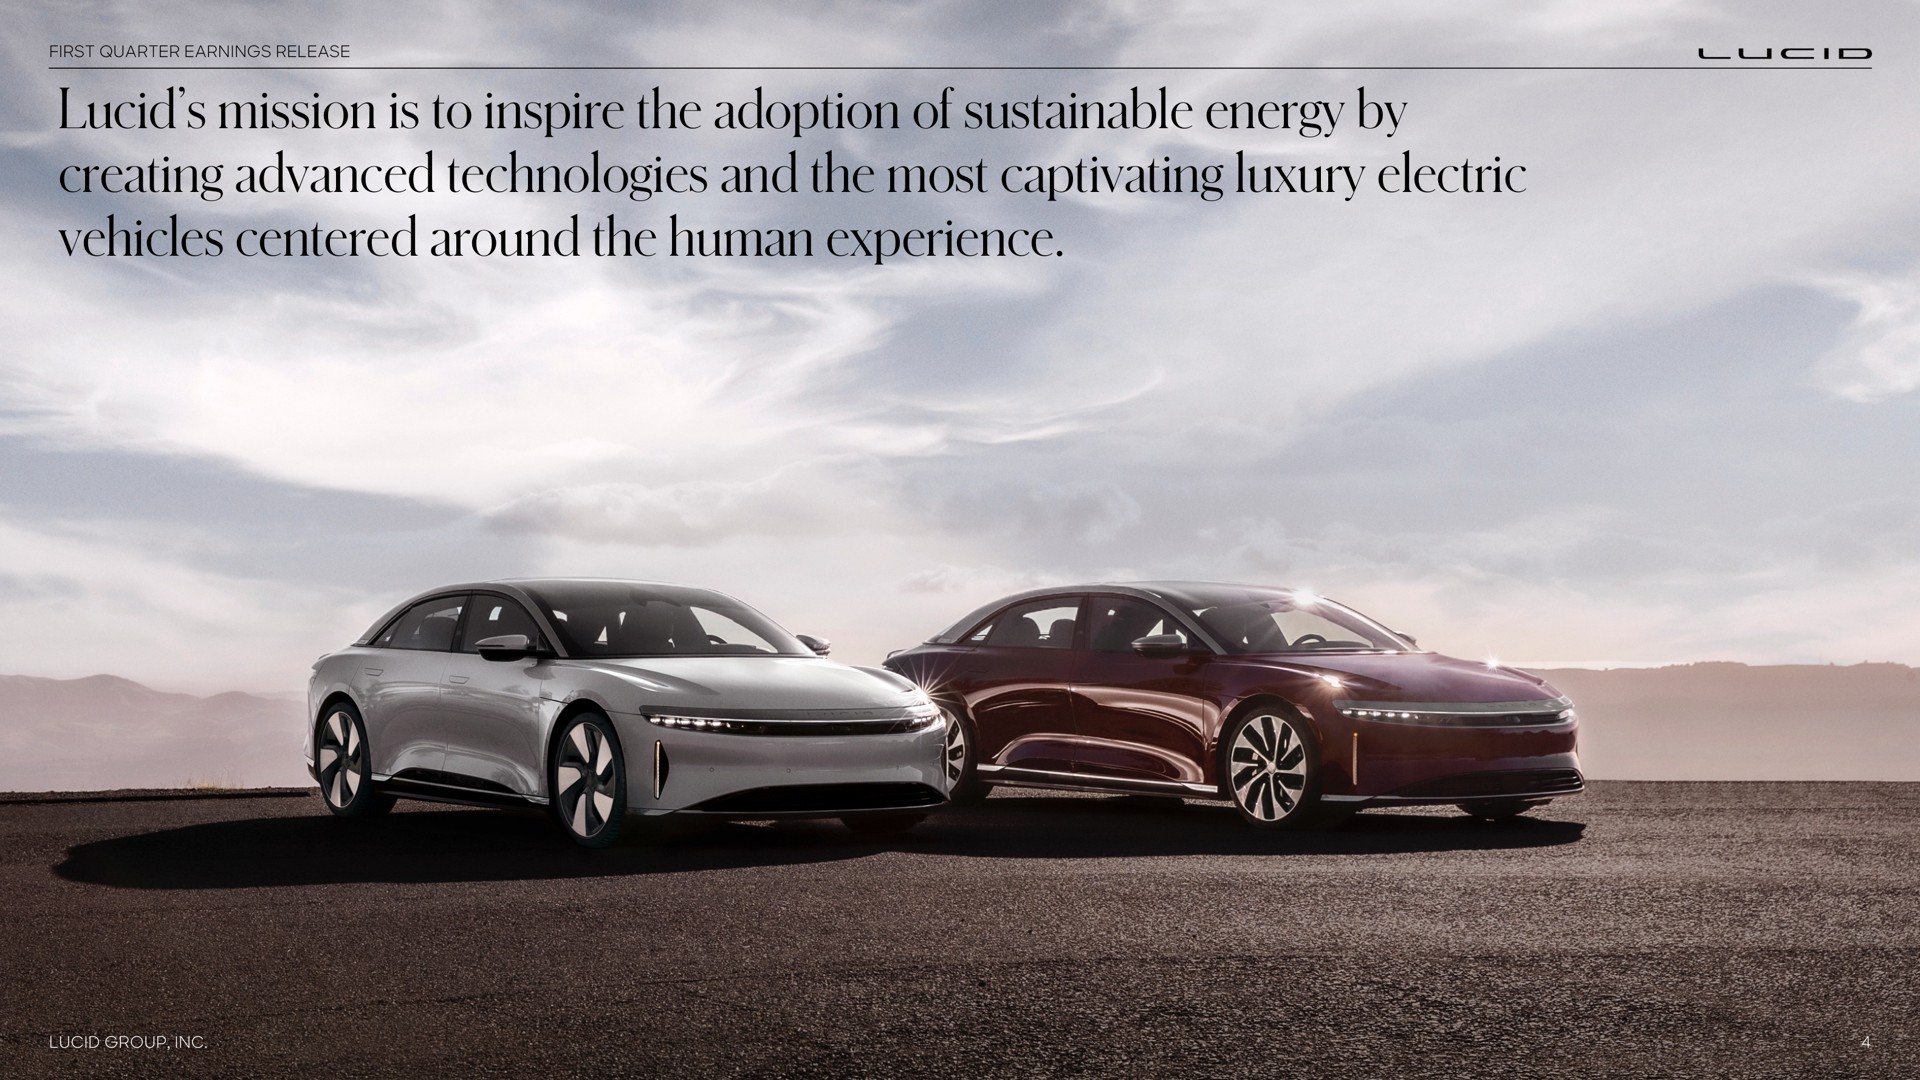 lucid mission is to inspire the adoption of sustainable energy by creating advanced technologies and the most captivating luxury electric vehicles centered around the human experience | Lucid Motors